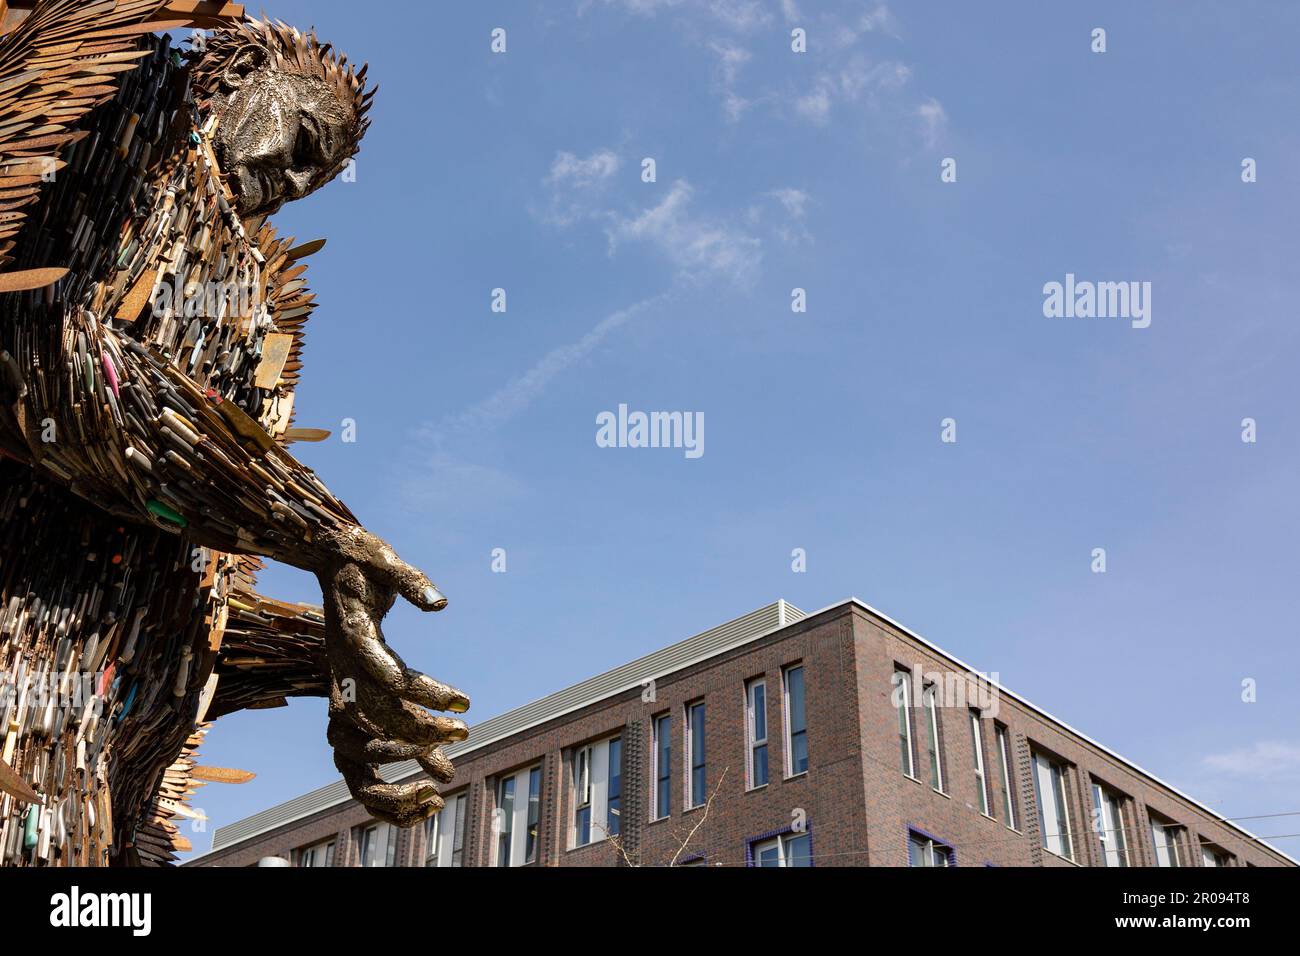 Hanley-Stoke-on-Trent, Staffordshire-United Kingdom April 24,2022 the national acclaimed Knife Angel statue spent most of April at Smithfield business Stock Photo